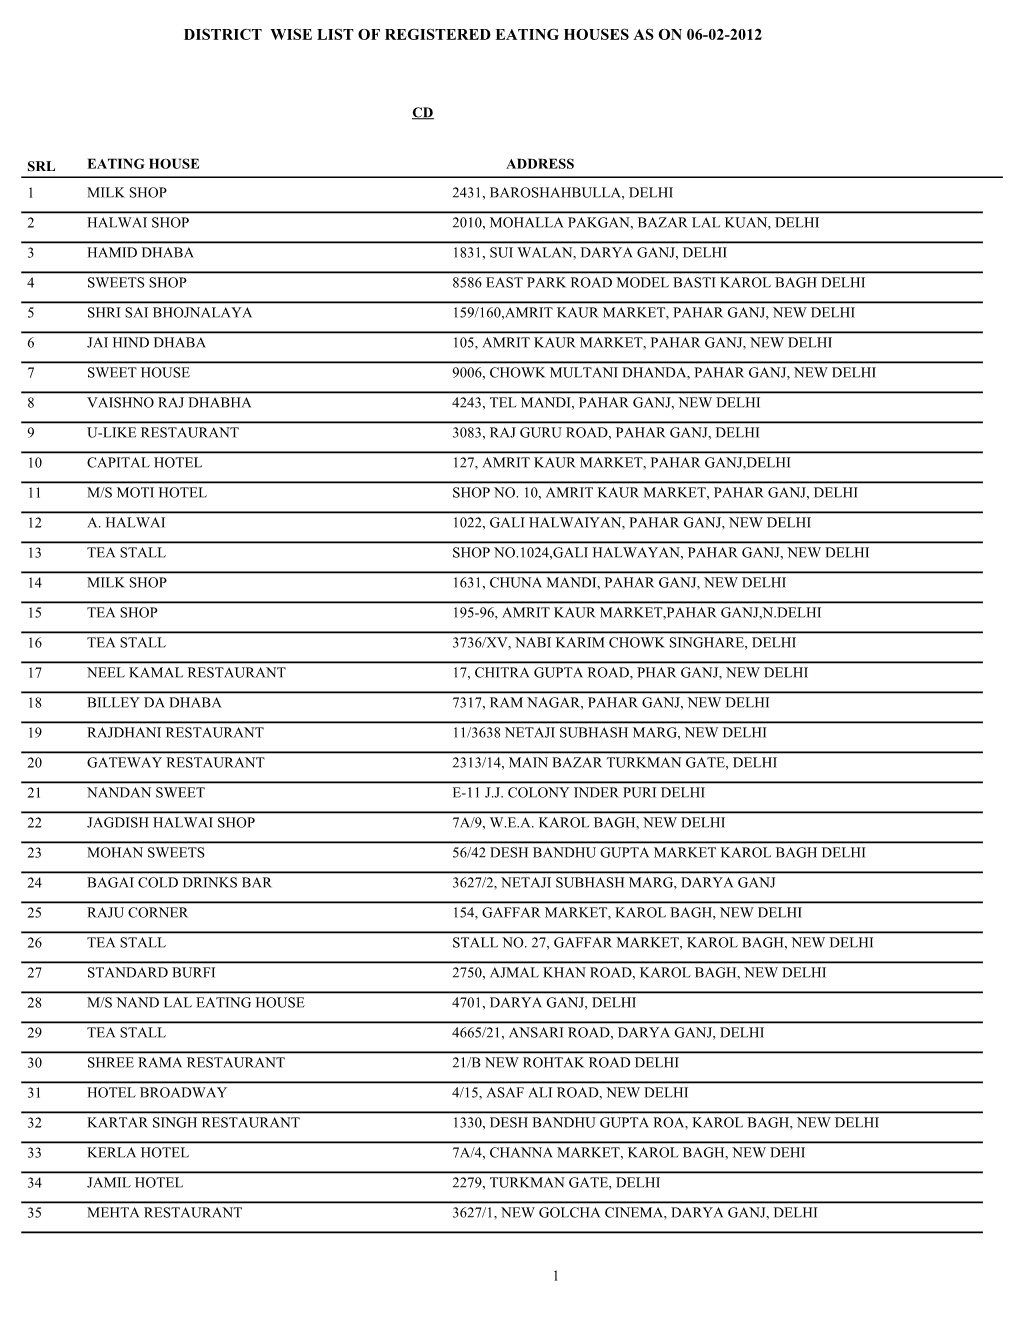 District Wise List of Registered Eating Houses As on 06-02-2012